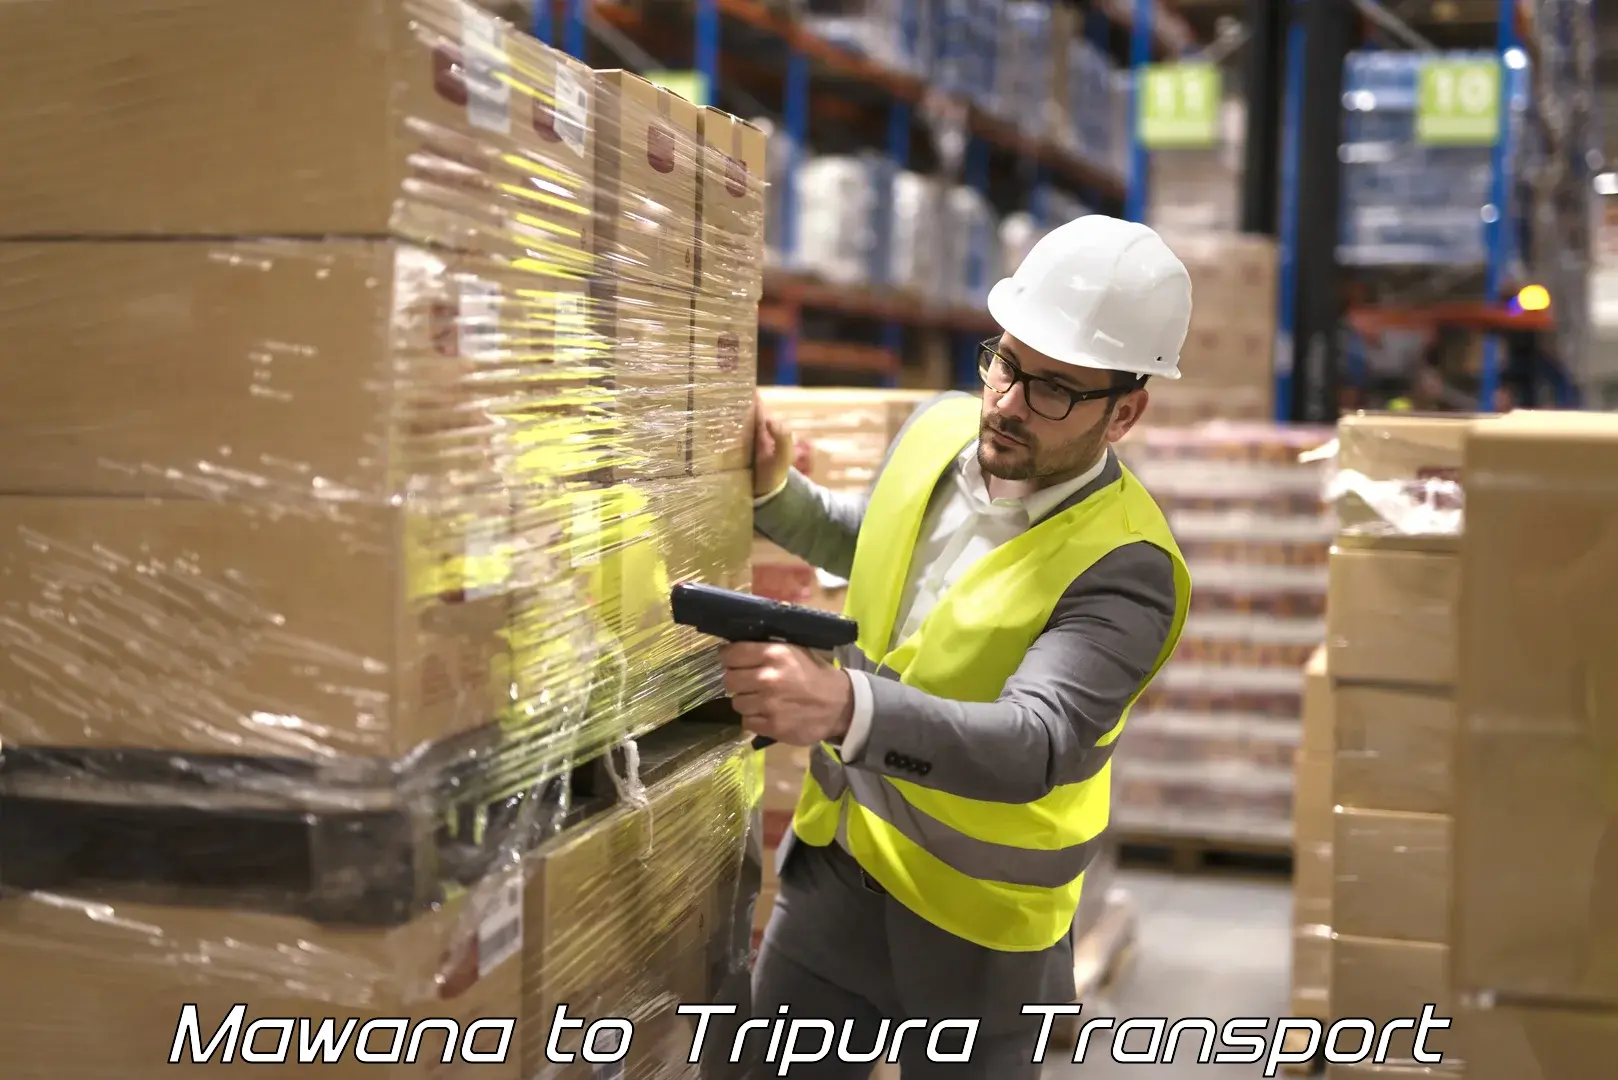 Container transport service Mawana to Tripura